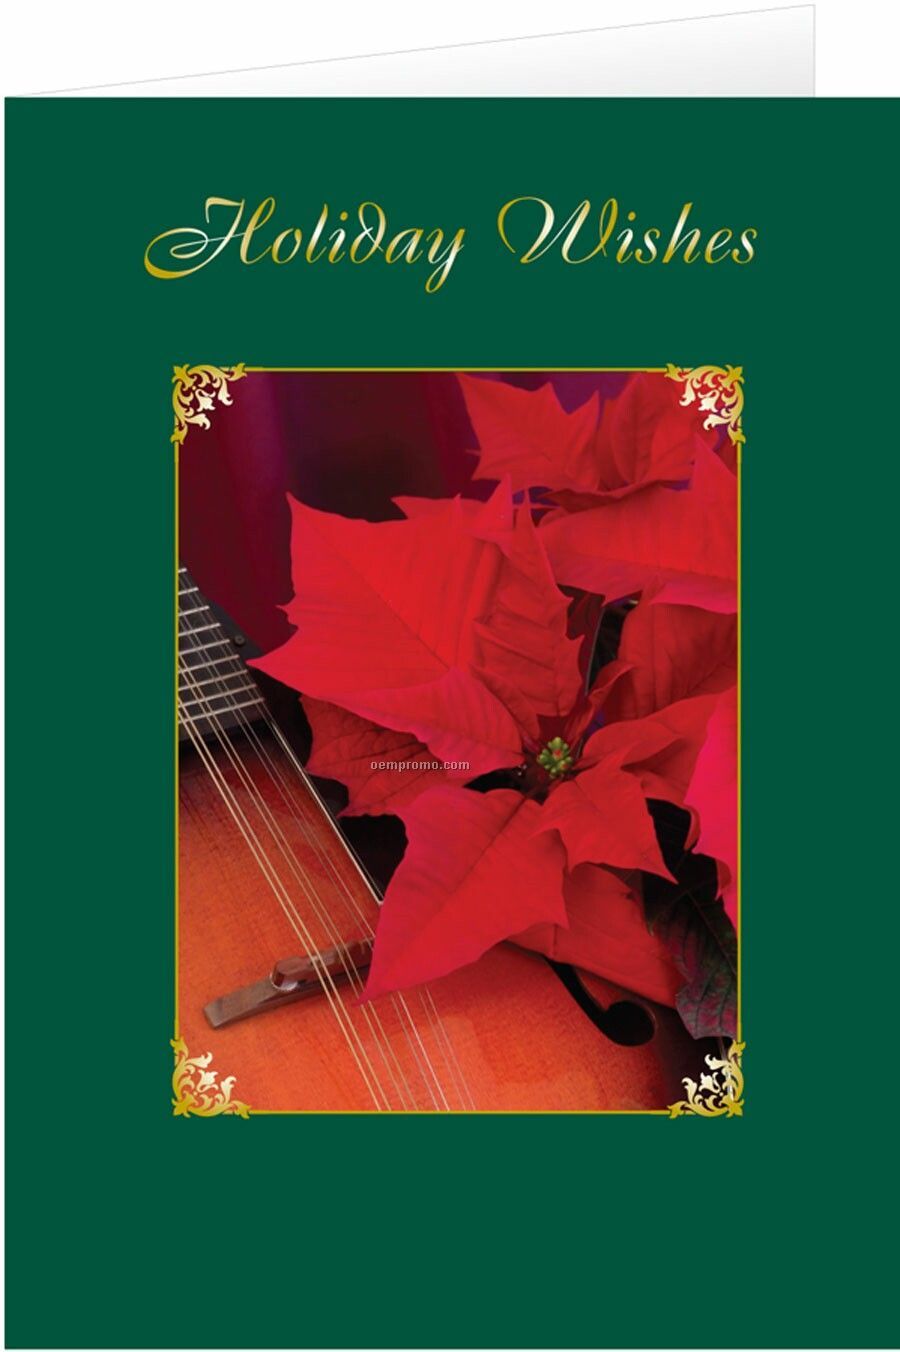 Poinsettia Holiday Wishes Greeting Card